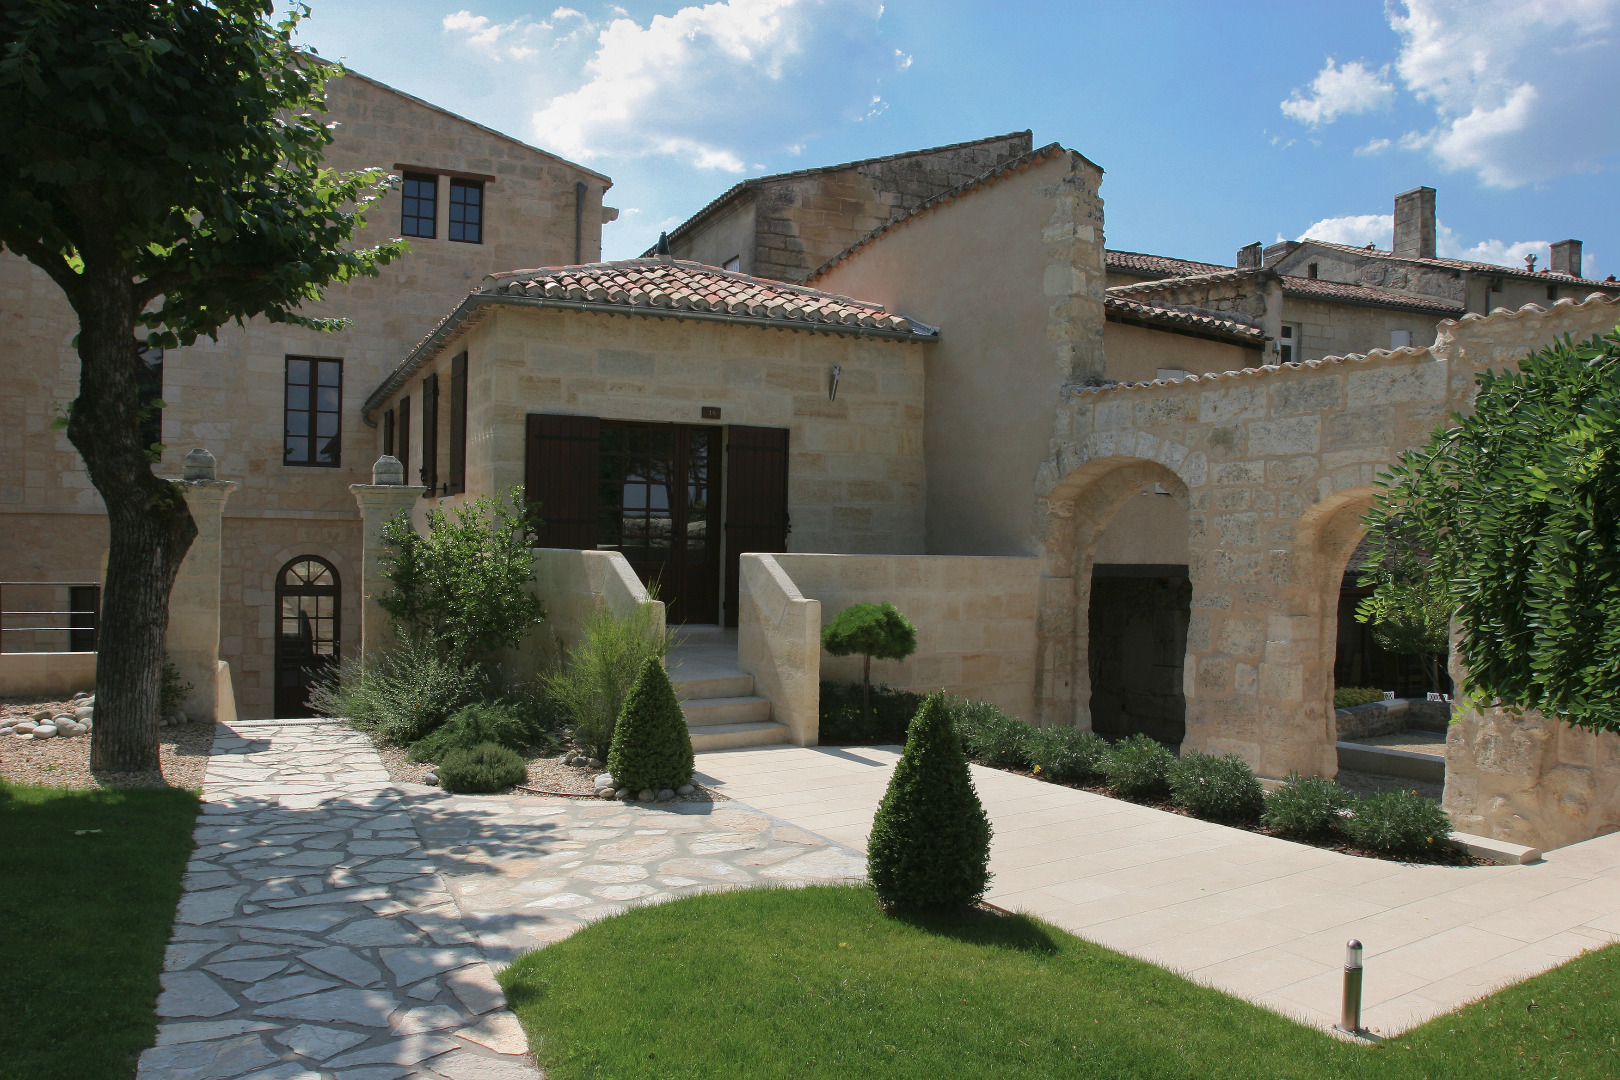 Logis de Remparts is recently remodeled, but has preserved its original architecture. 